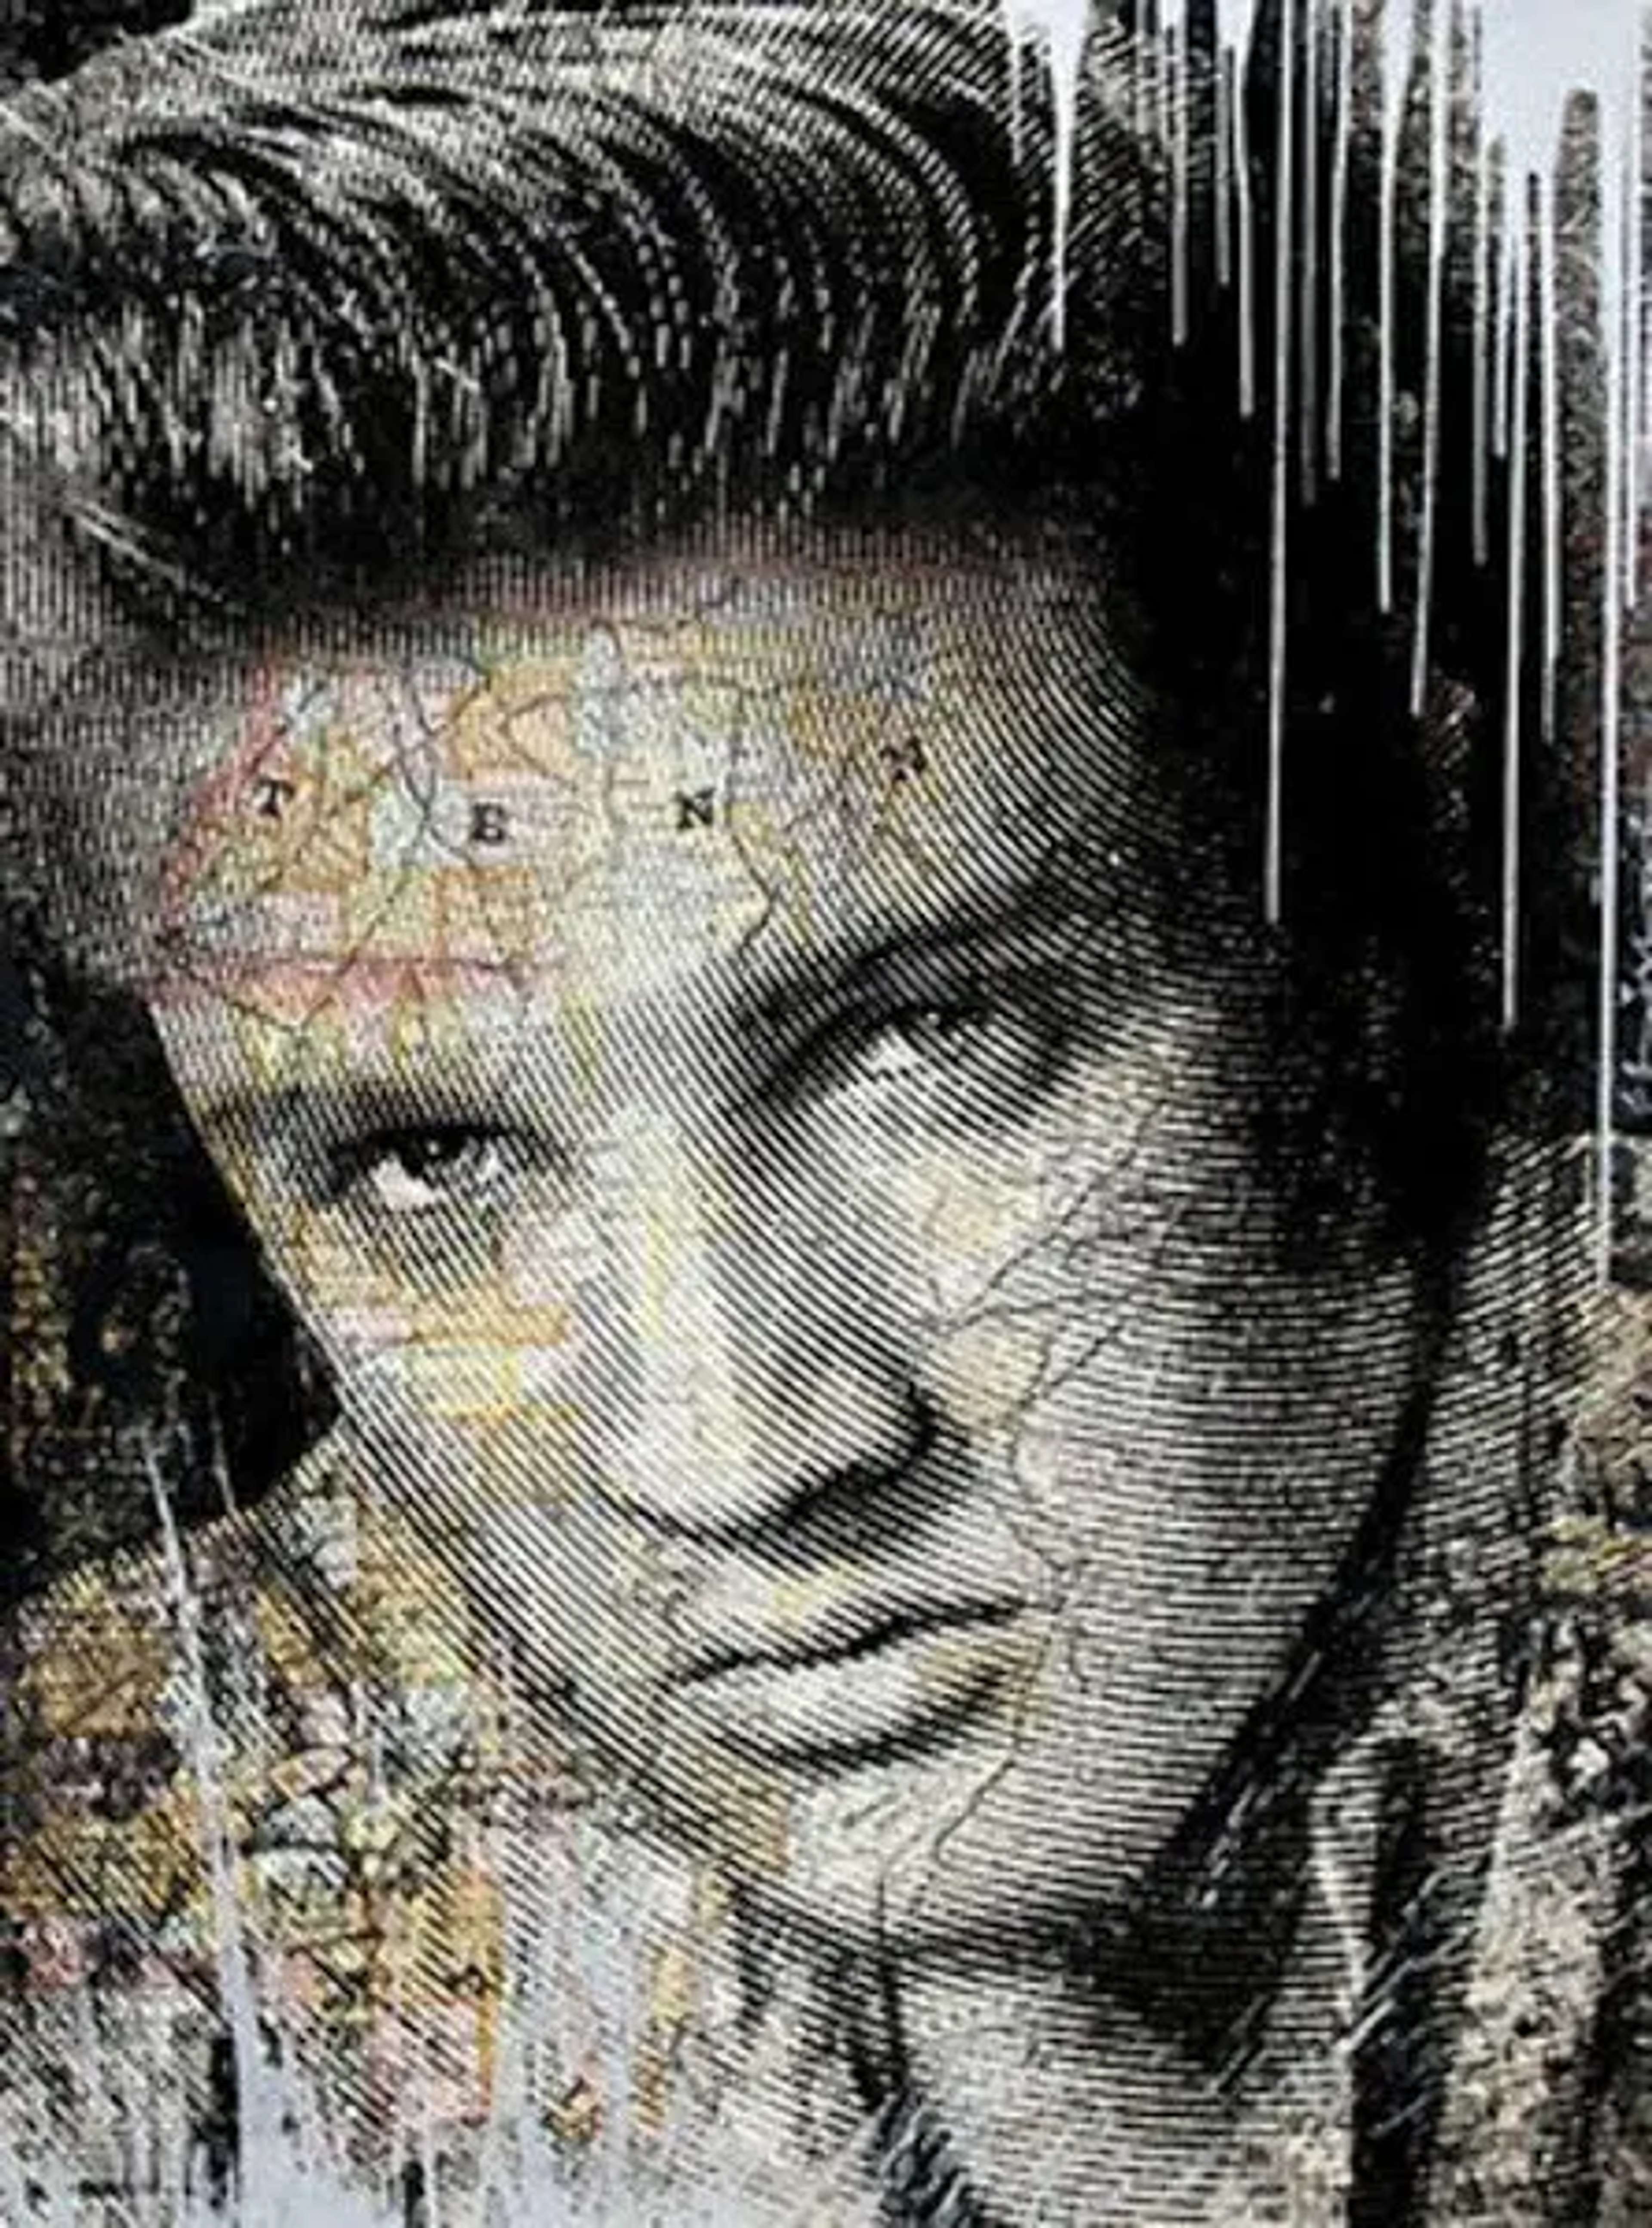 King of Rock and Roll by Mr. Brainwash